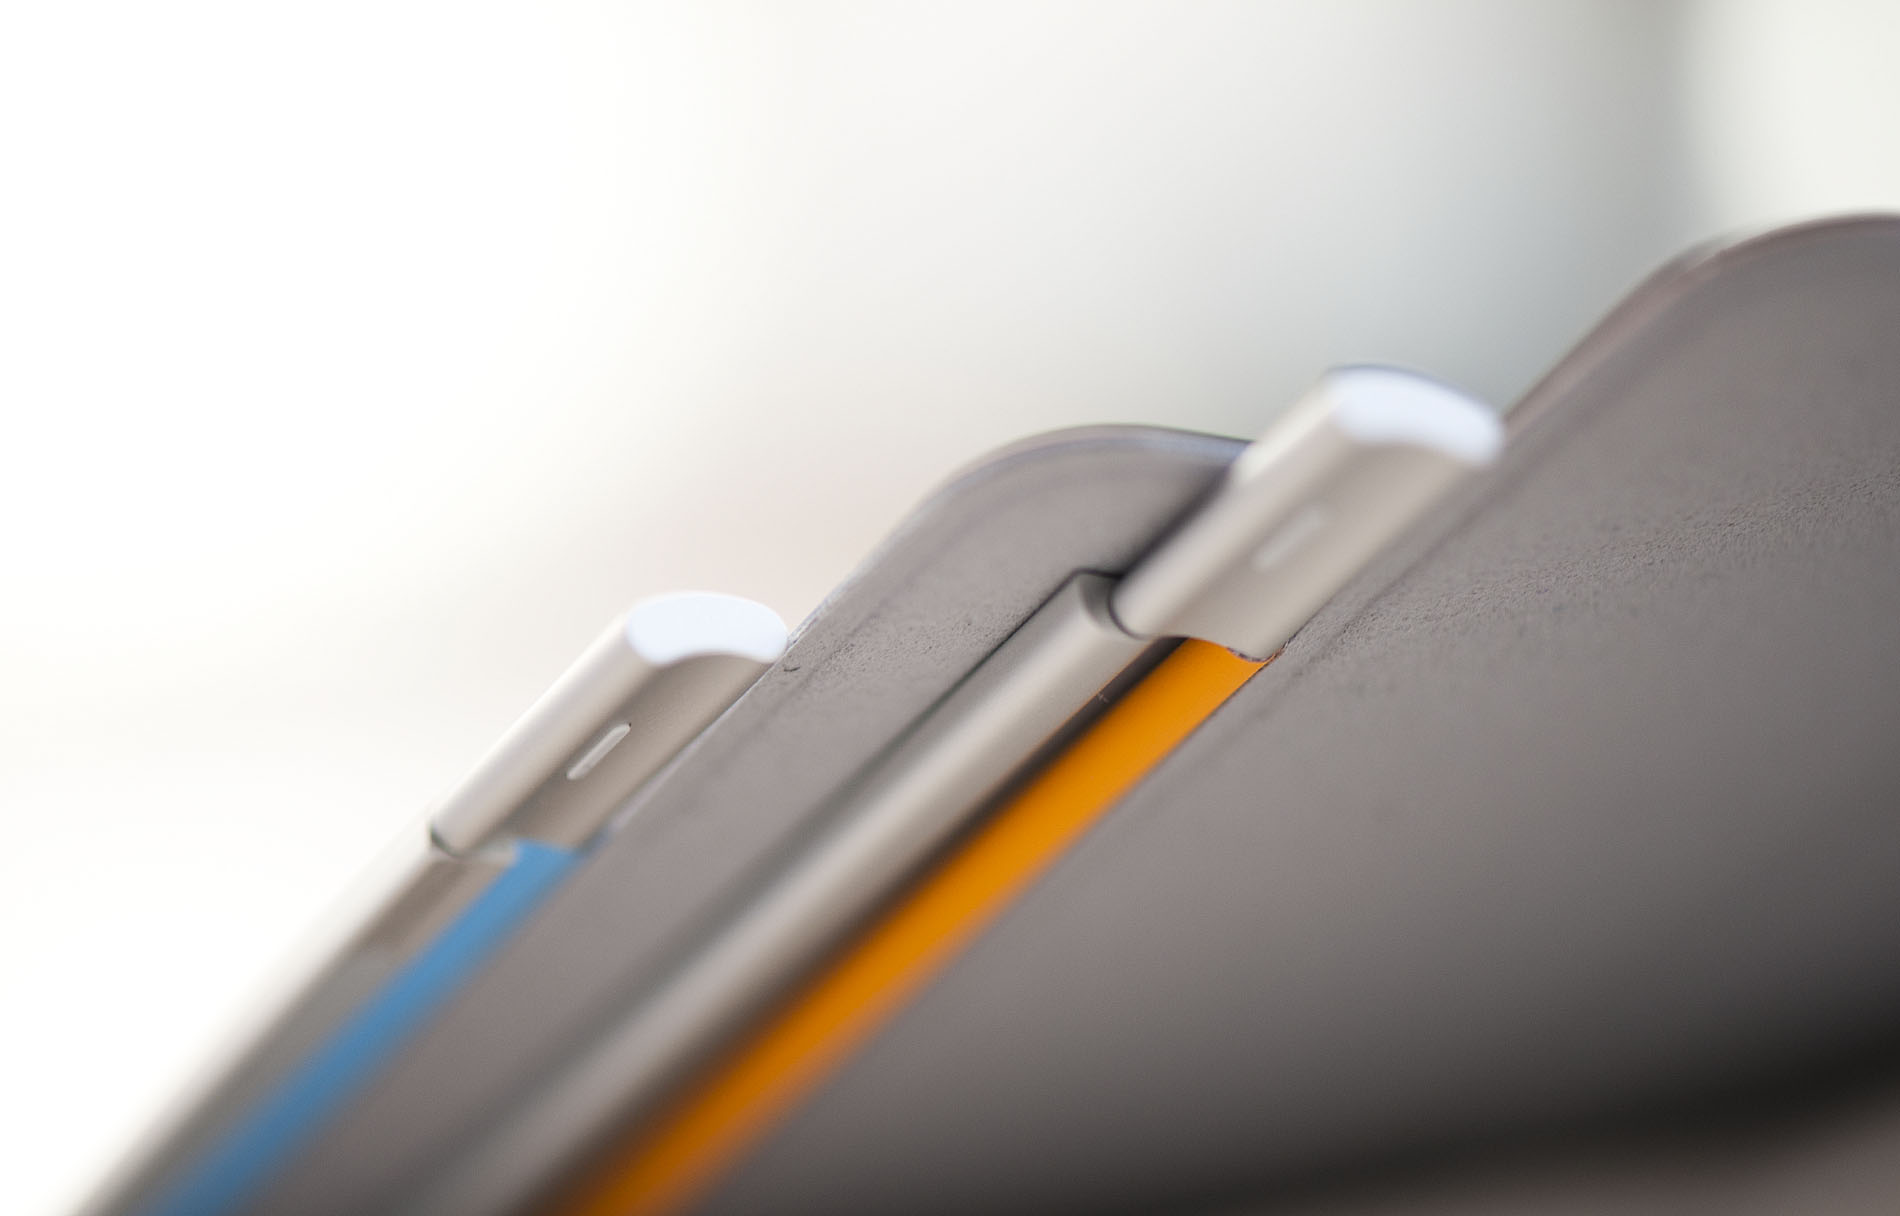 krabbe engagement sensor Apple's foray into iPad cases - Smart Covers - The Apple iPad 2 Review